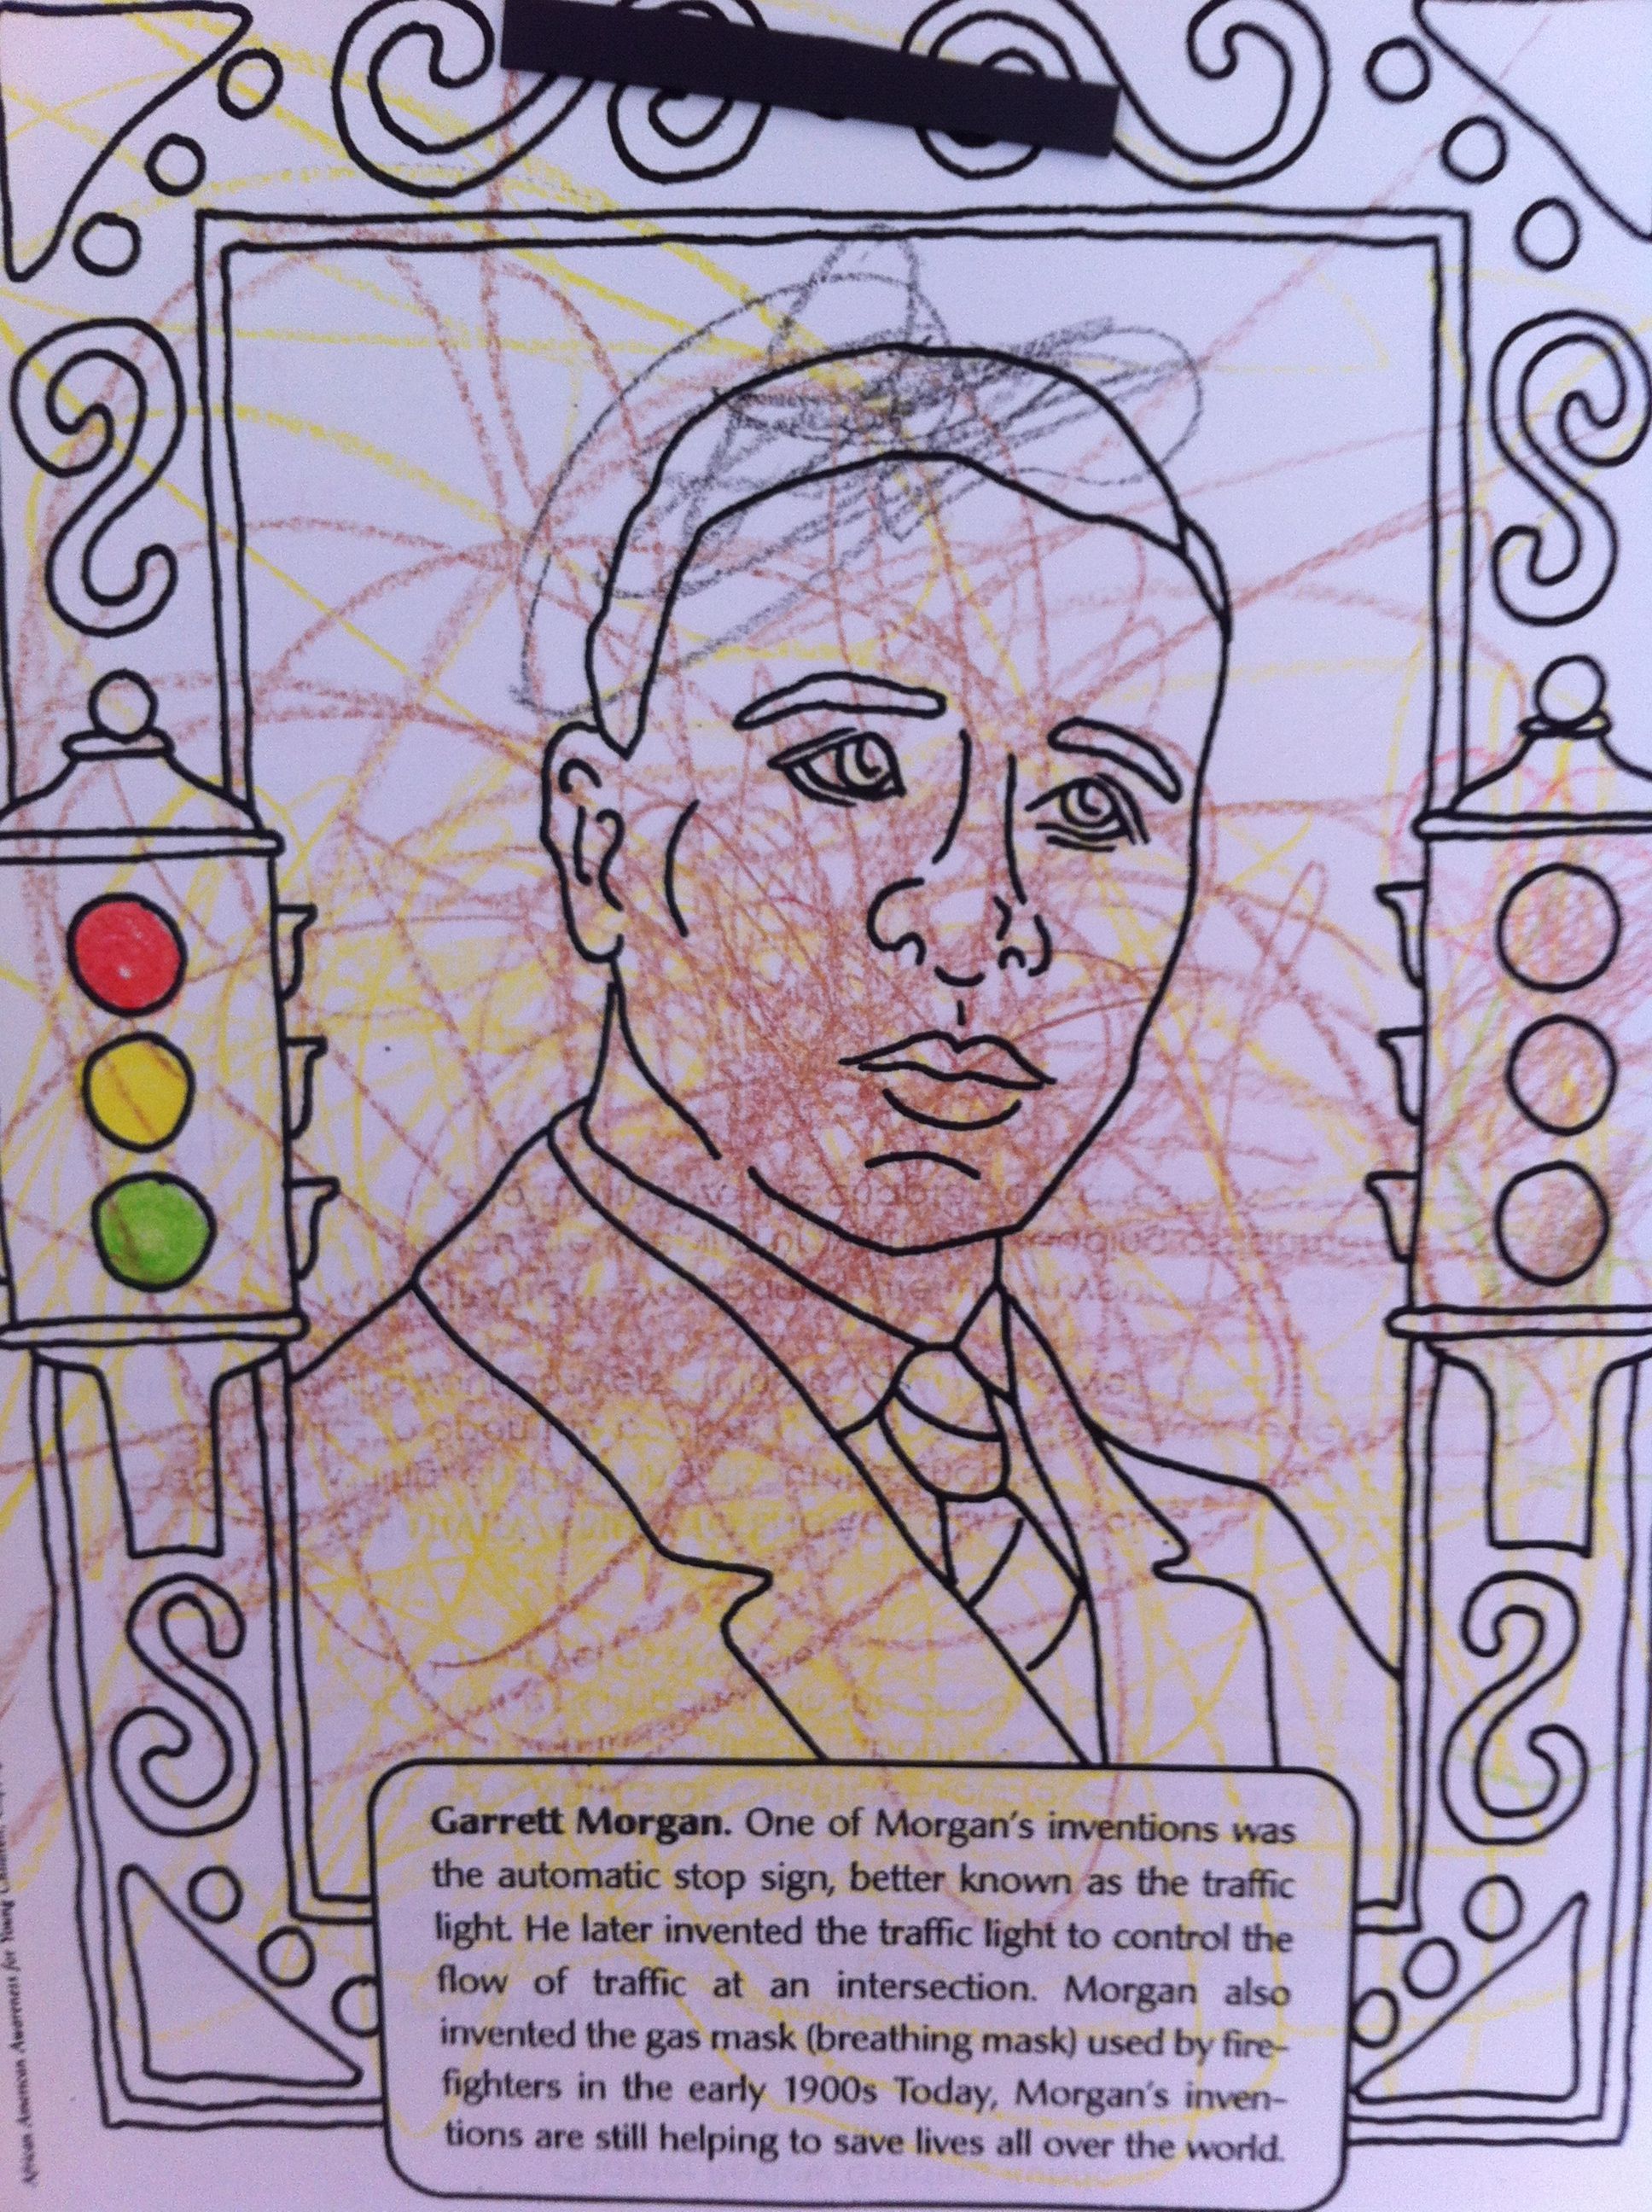 Played red light green light as they colored pic of garrett morgan pre k activities red light green light light red